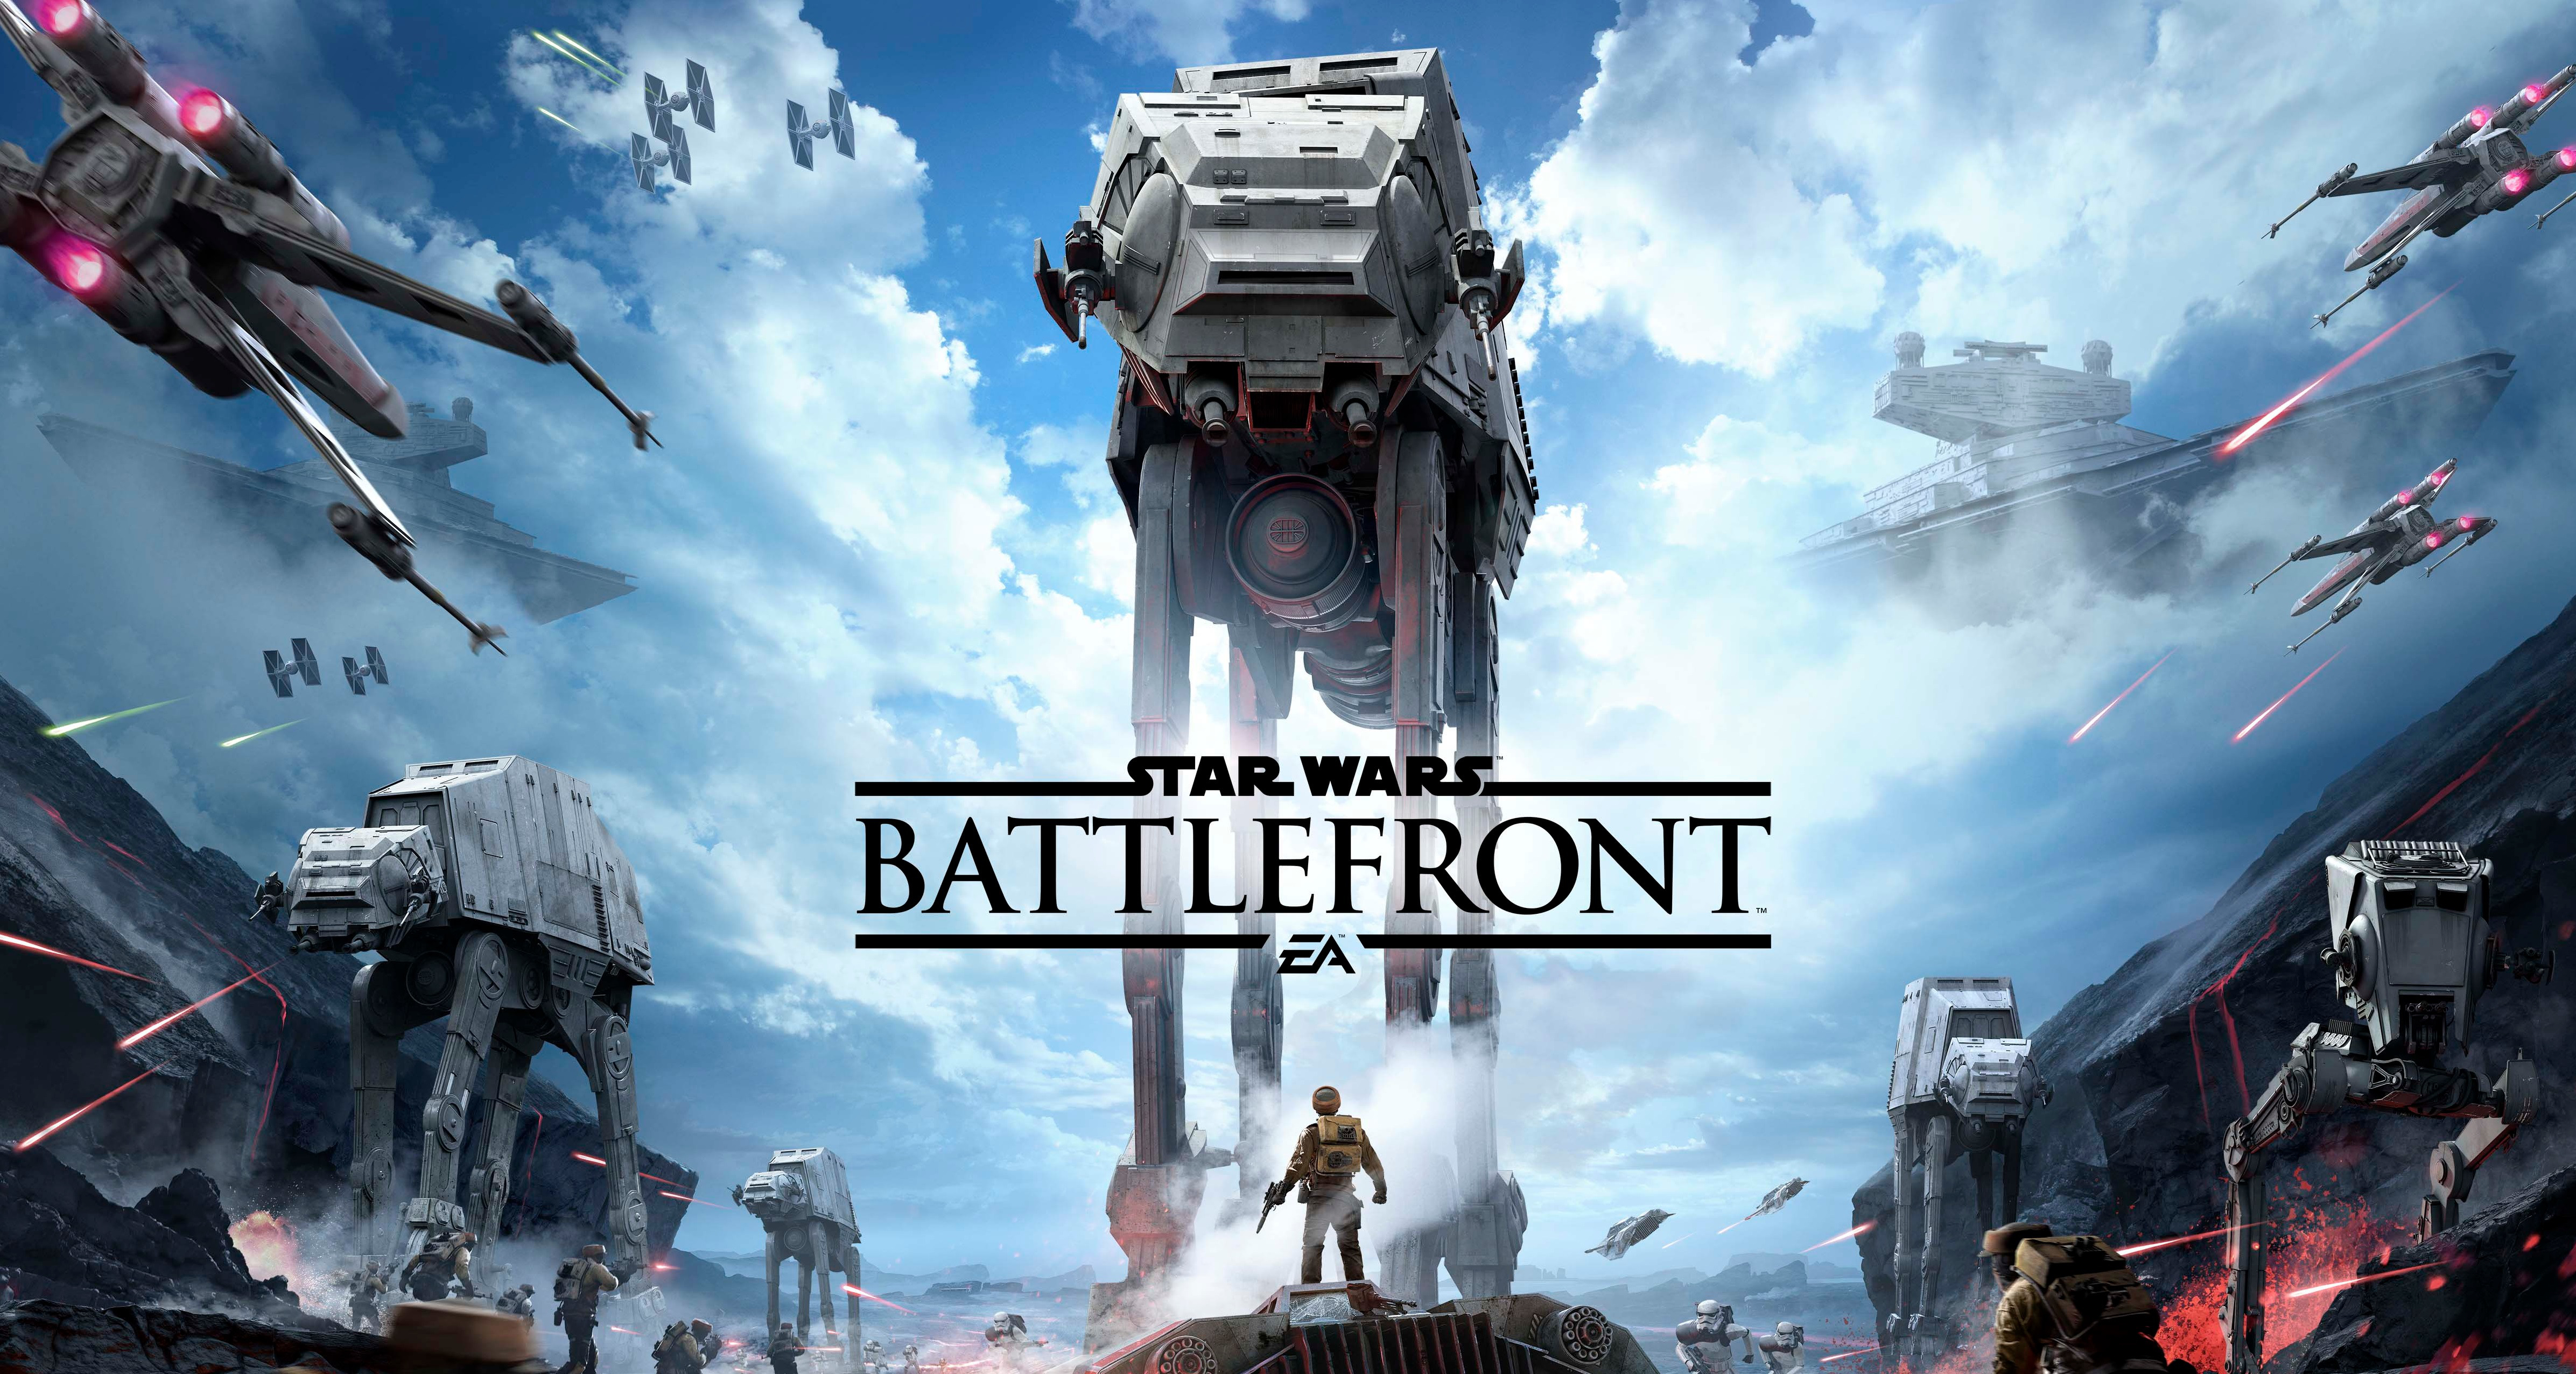 Star Wars Battlefront Beta – Available Now!